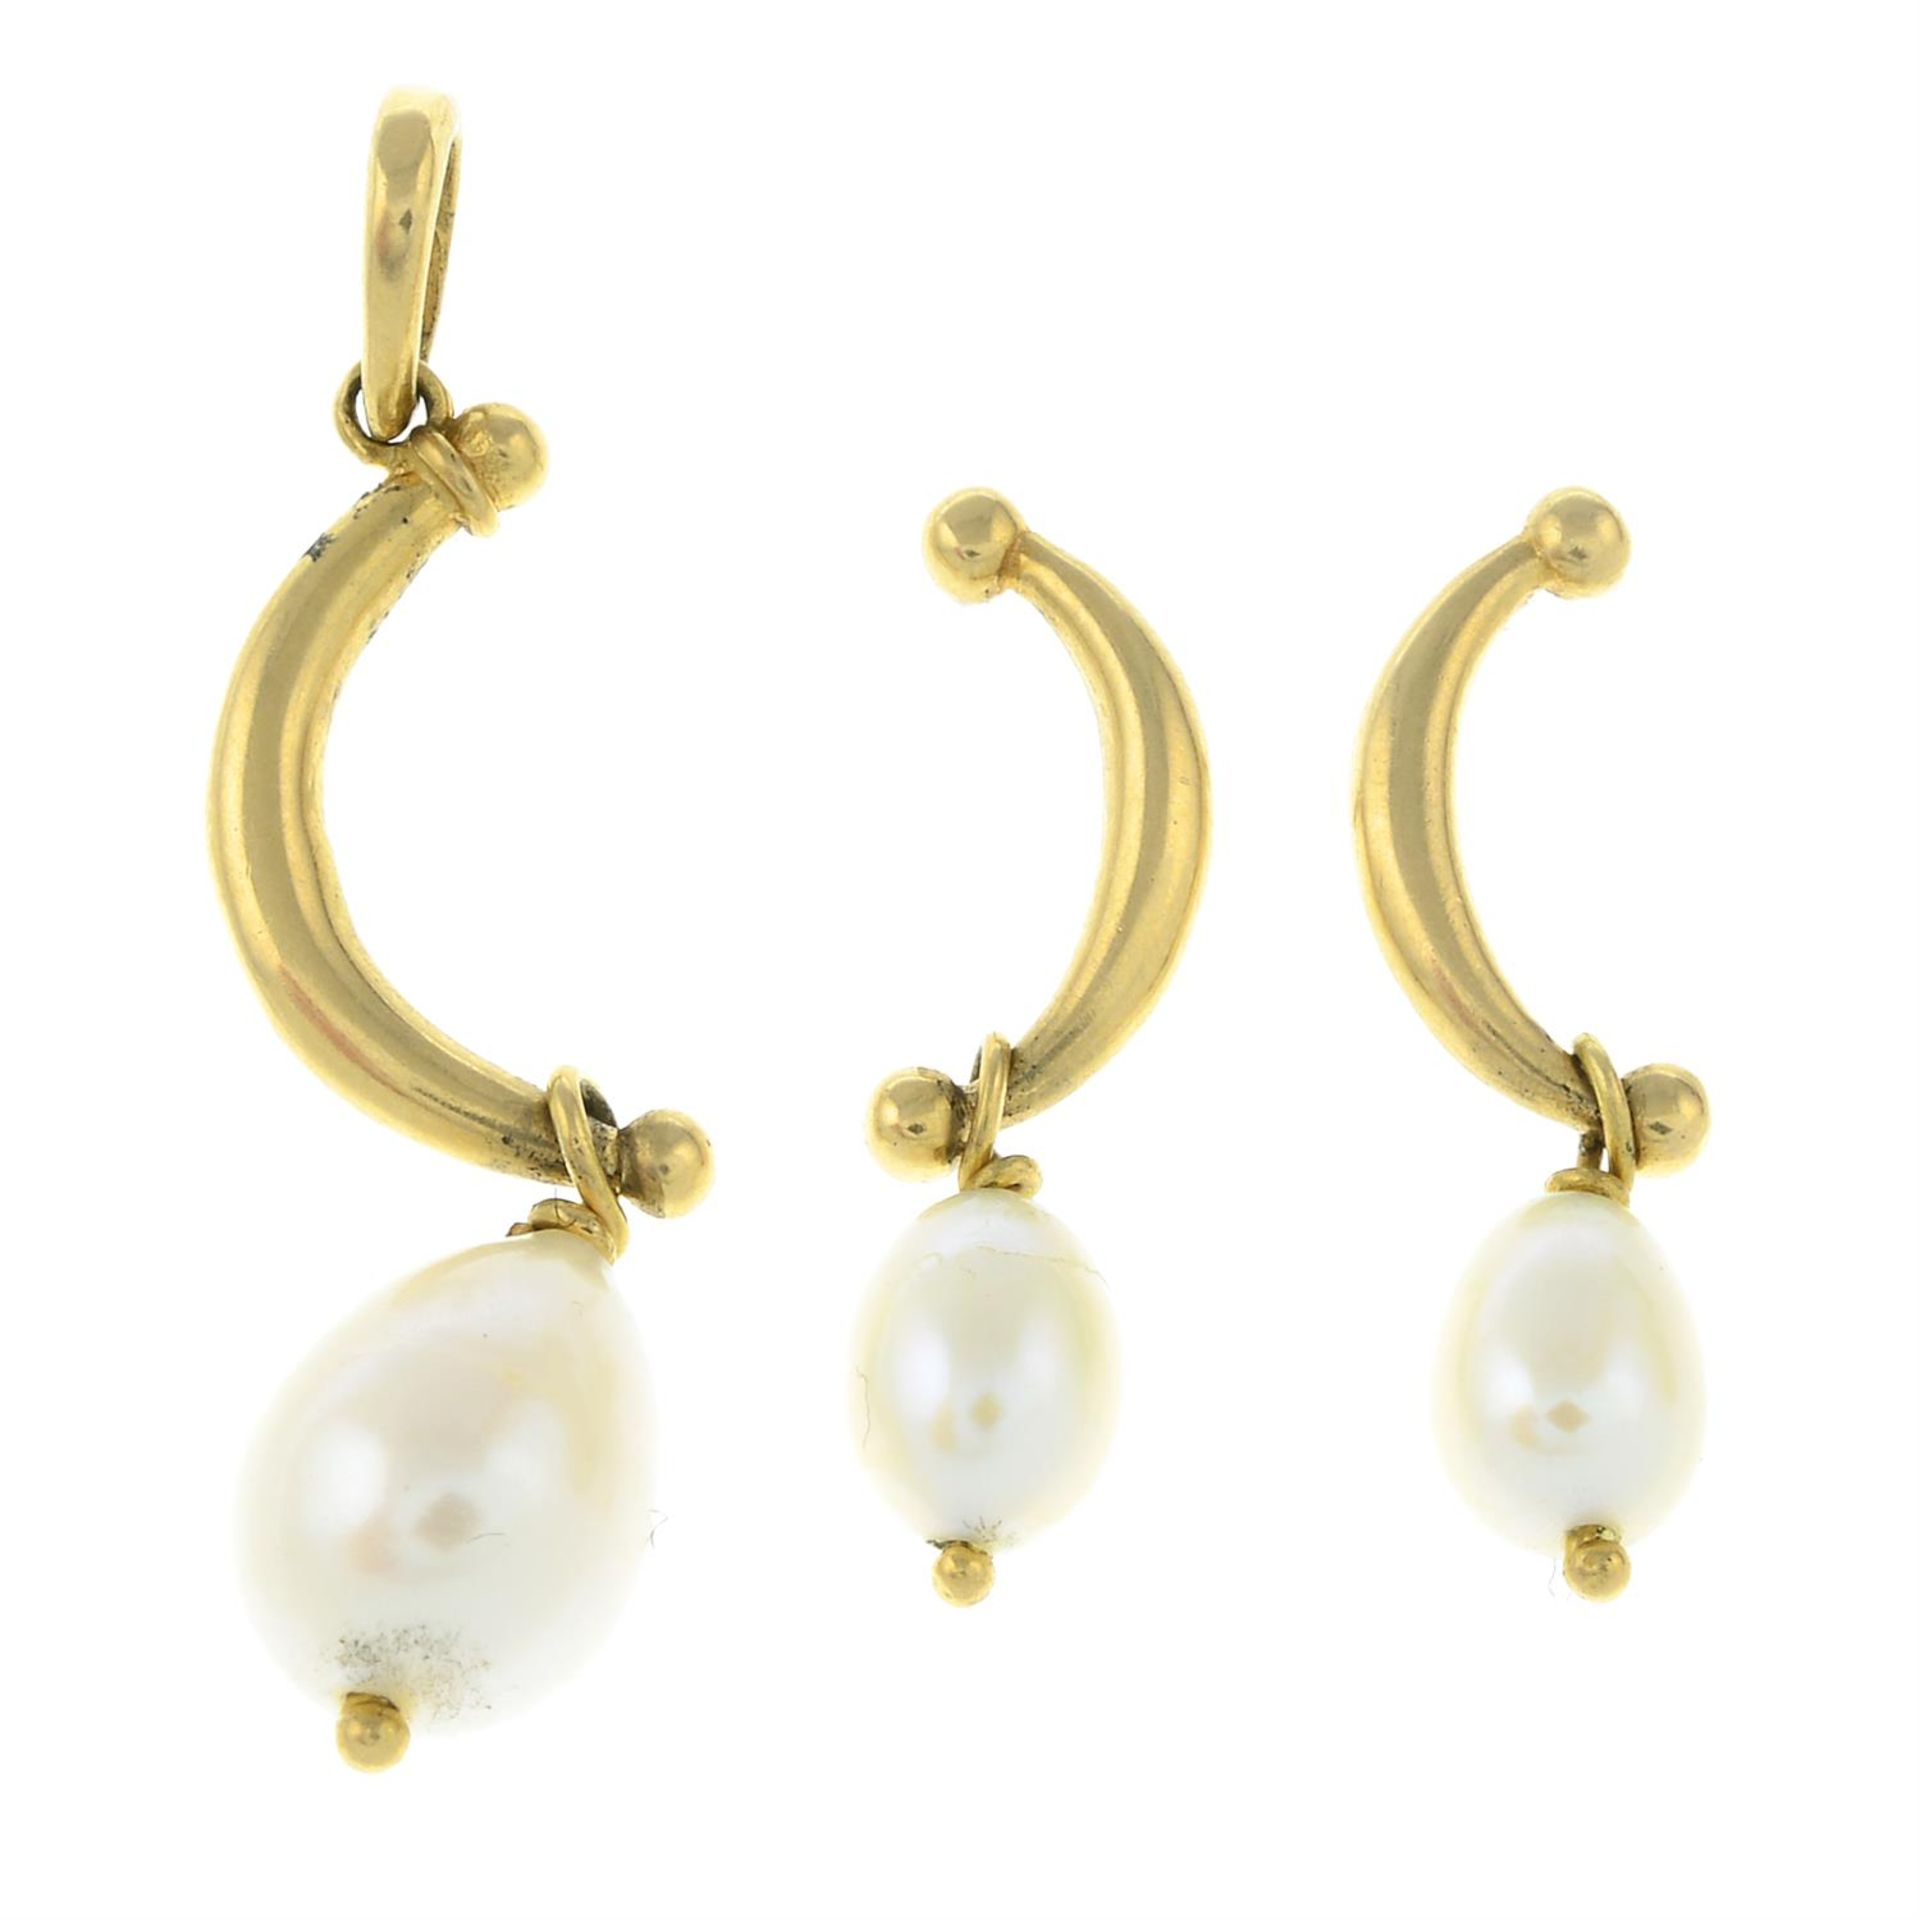 A cultured pearl drop pendant, together with a pair of matching earrings.